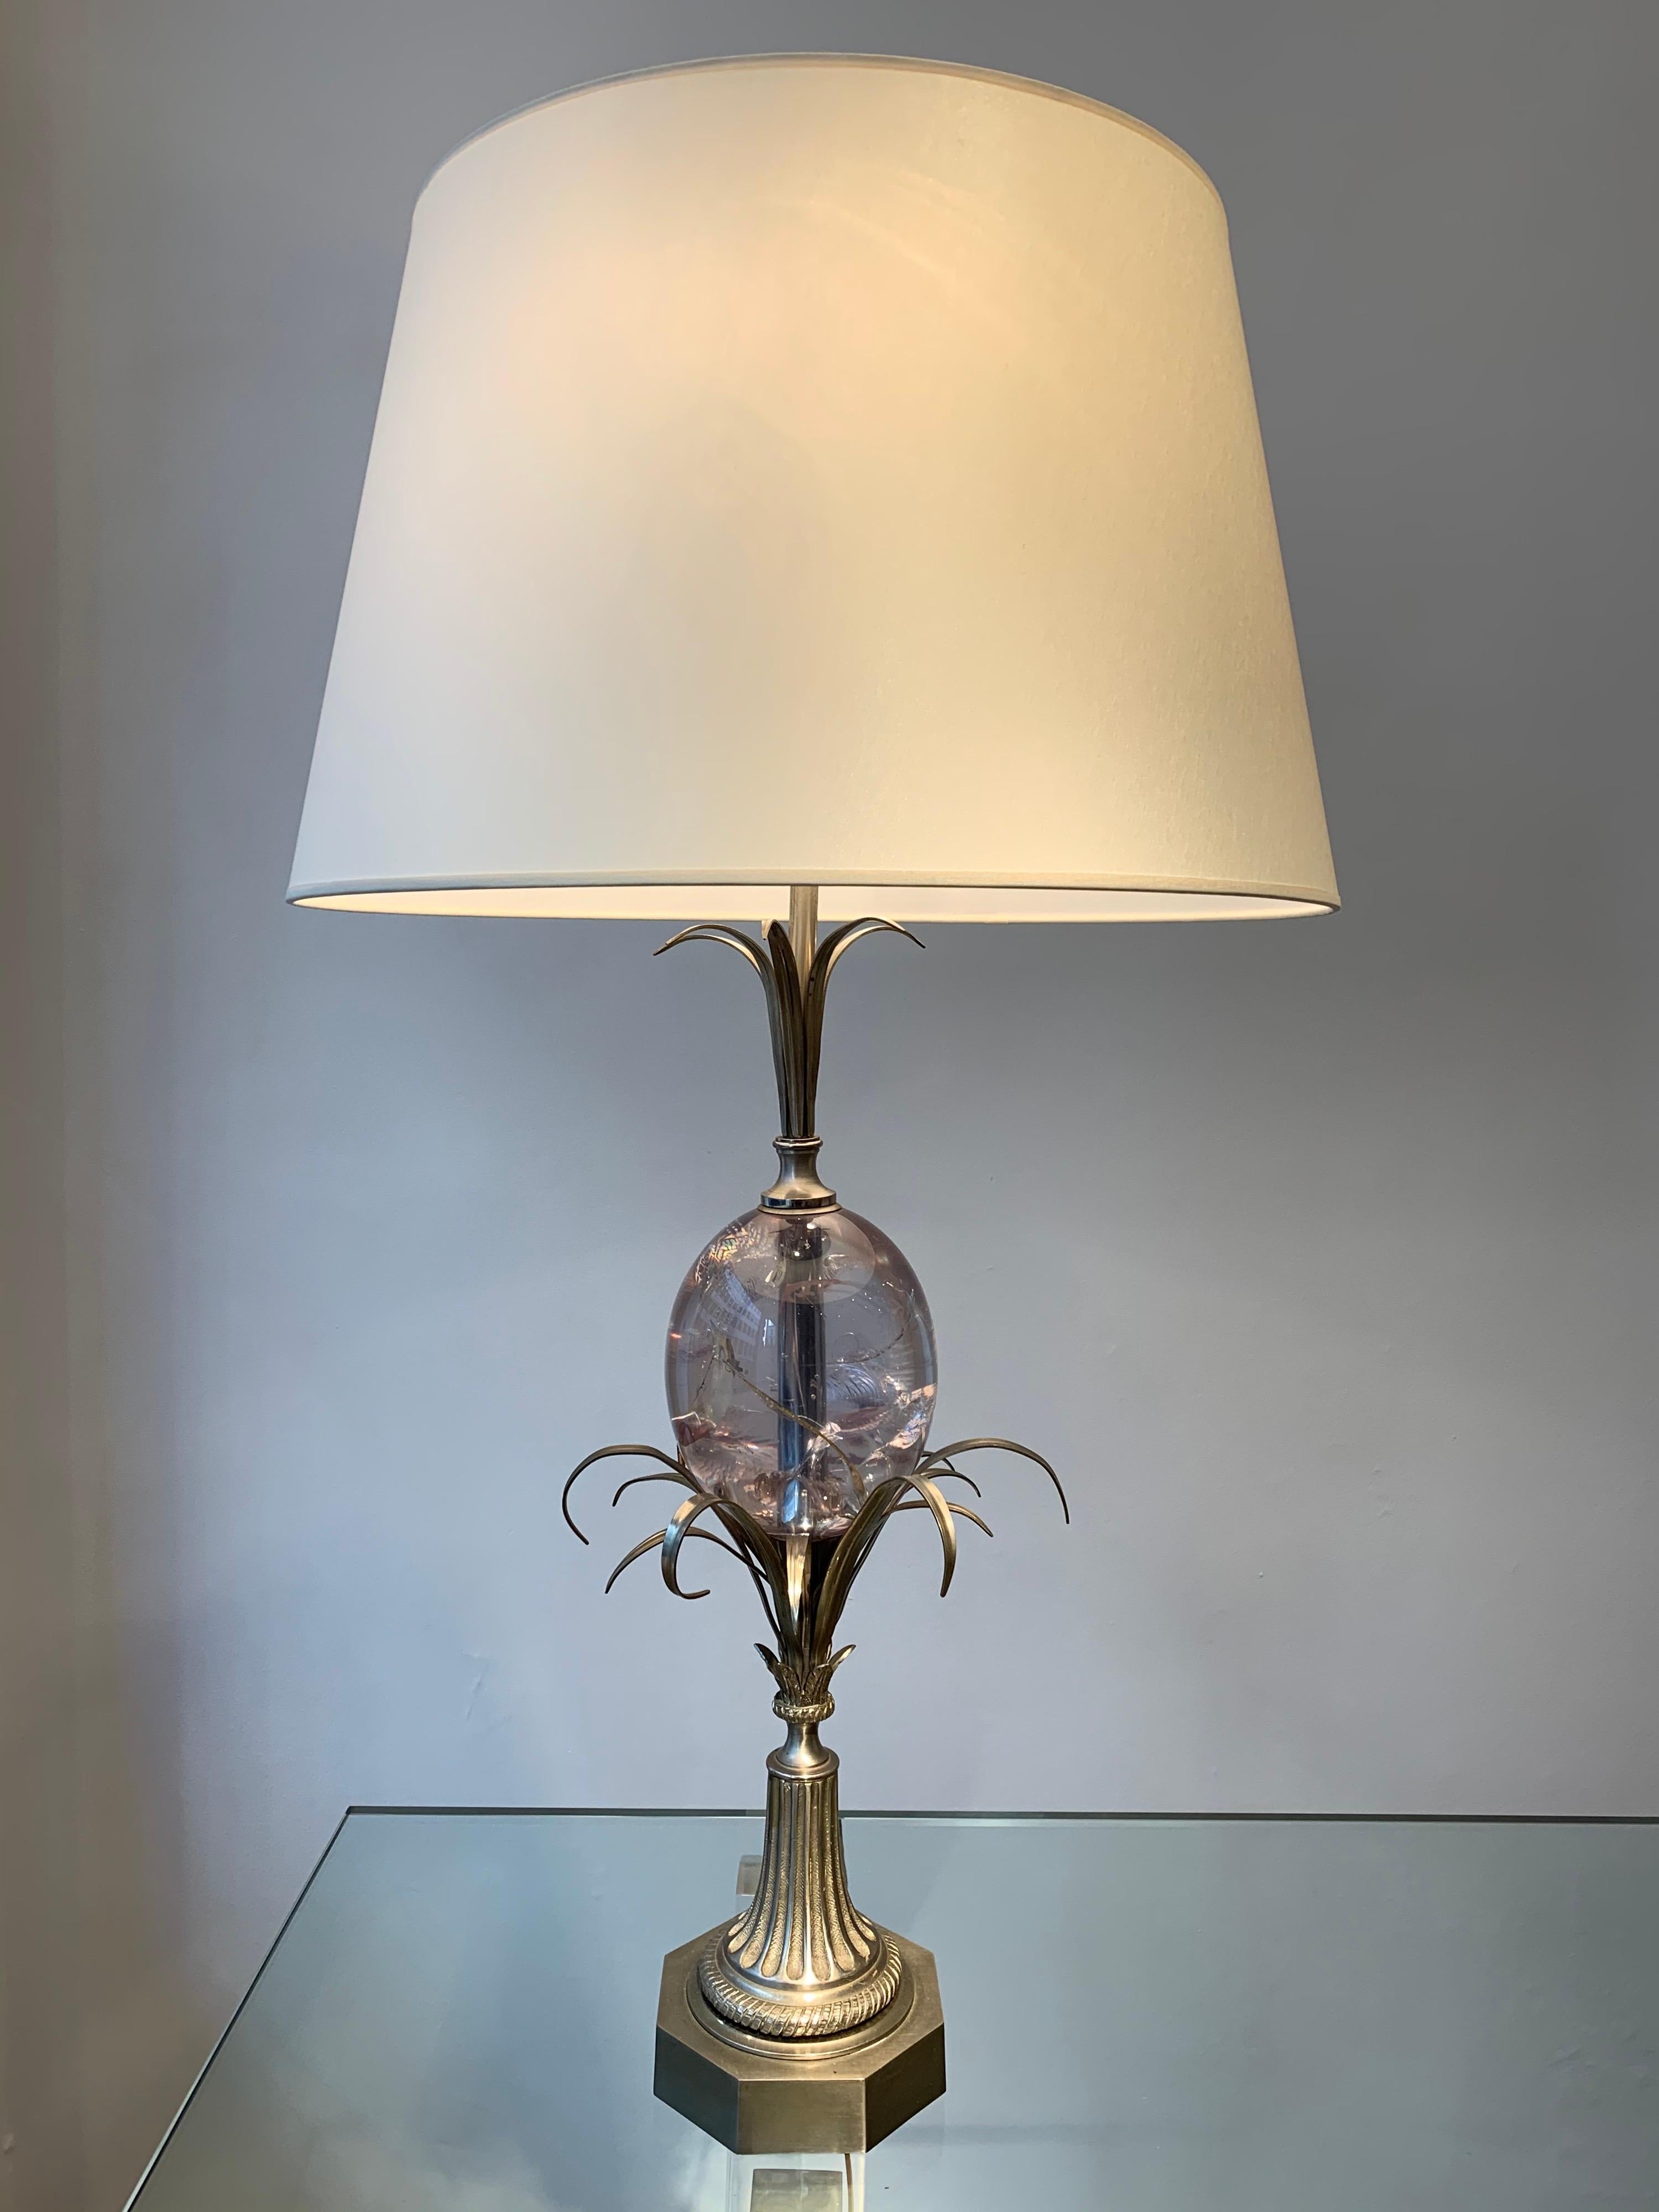 Maison Charles is well known manufacturer and designer in Paris, which specializes in lighting. This particular lamp dates circa 1960s-1970s. The work of Maison Charles shows great quality.